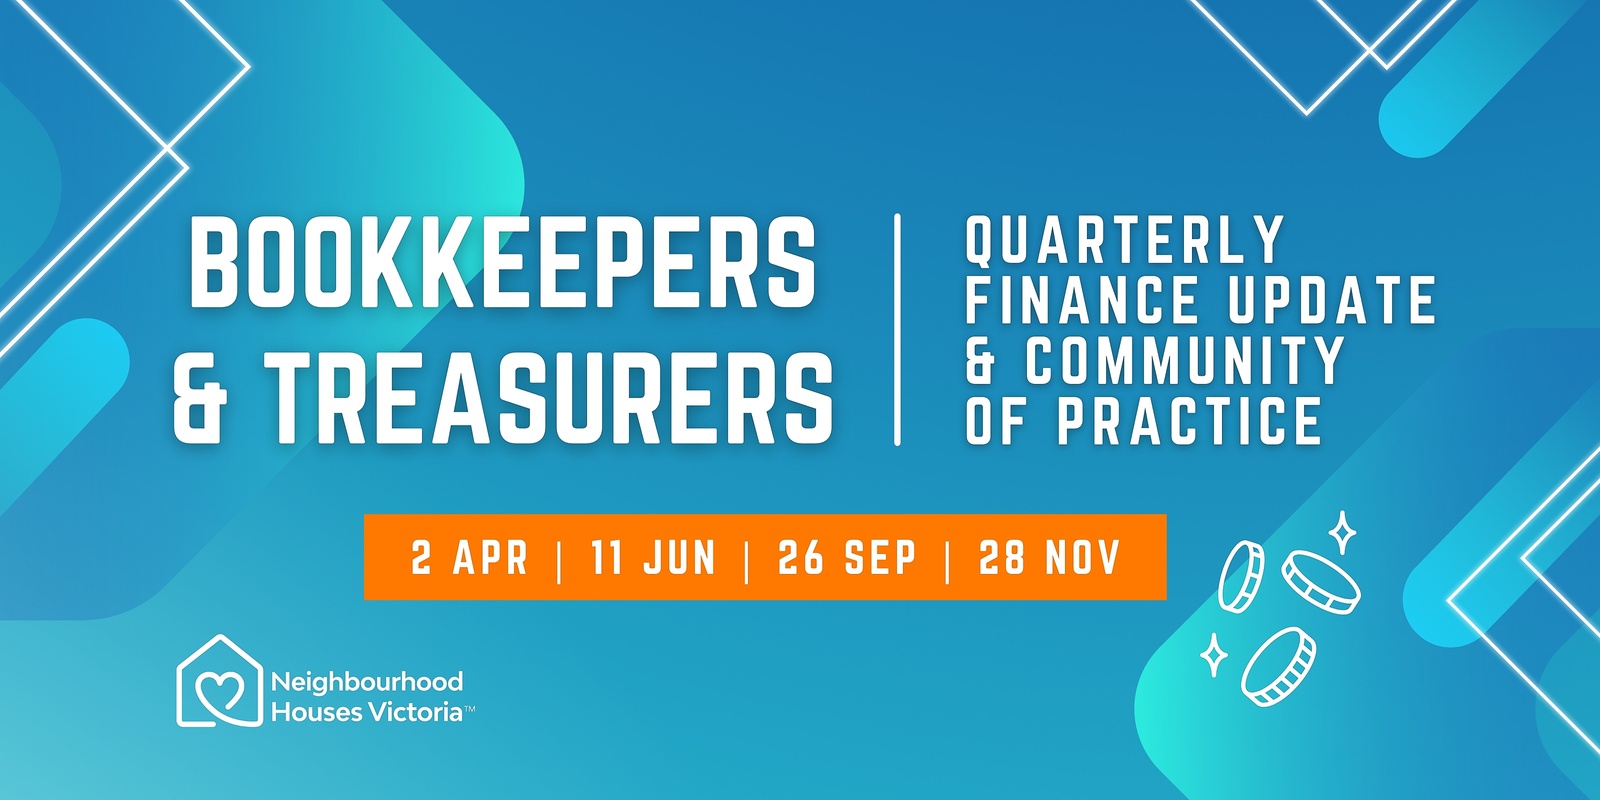 Banner image for Bookkeepers & Treasurers: Quarterly finance update #1 & community of practice 